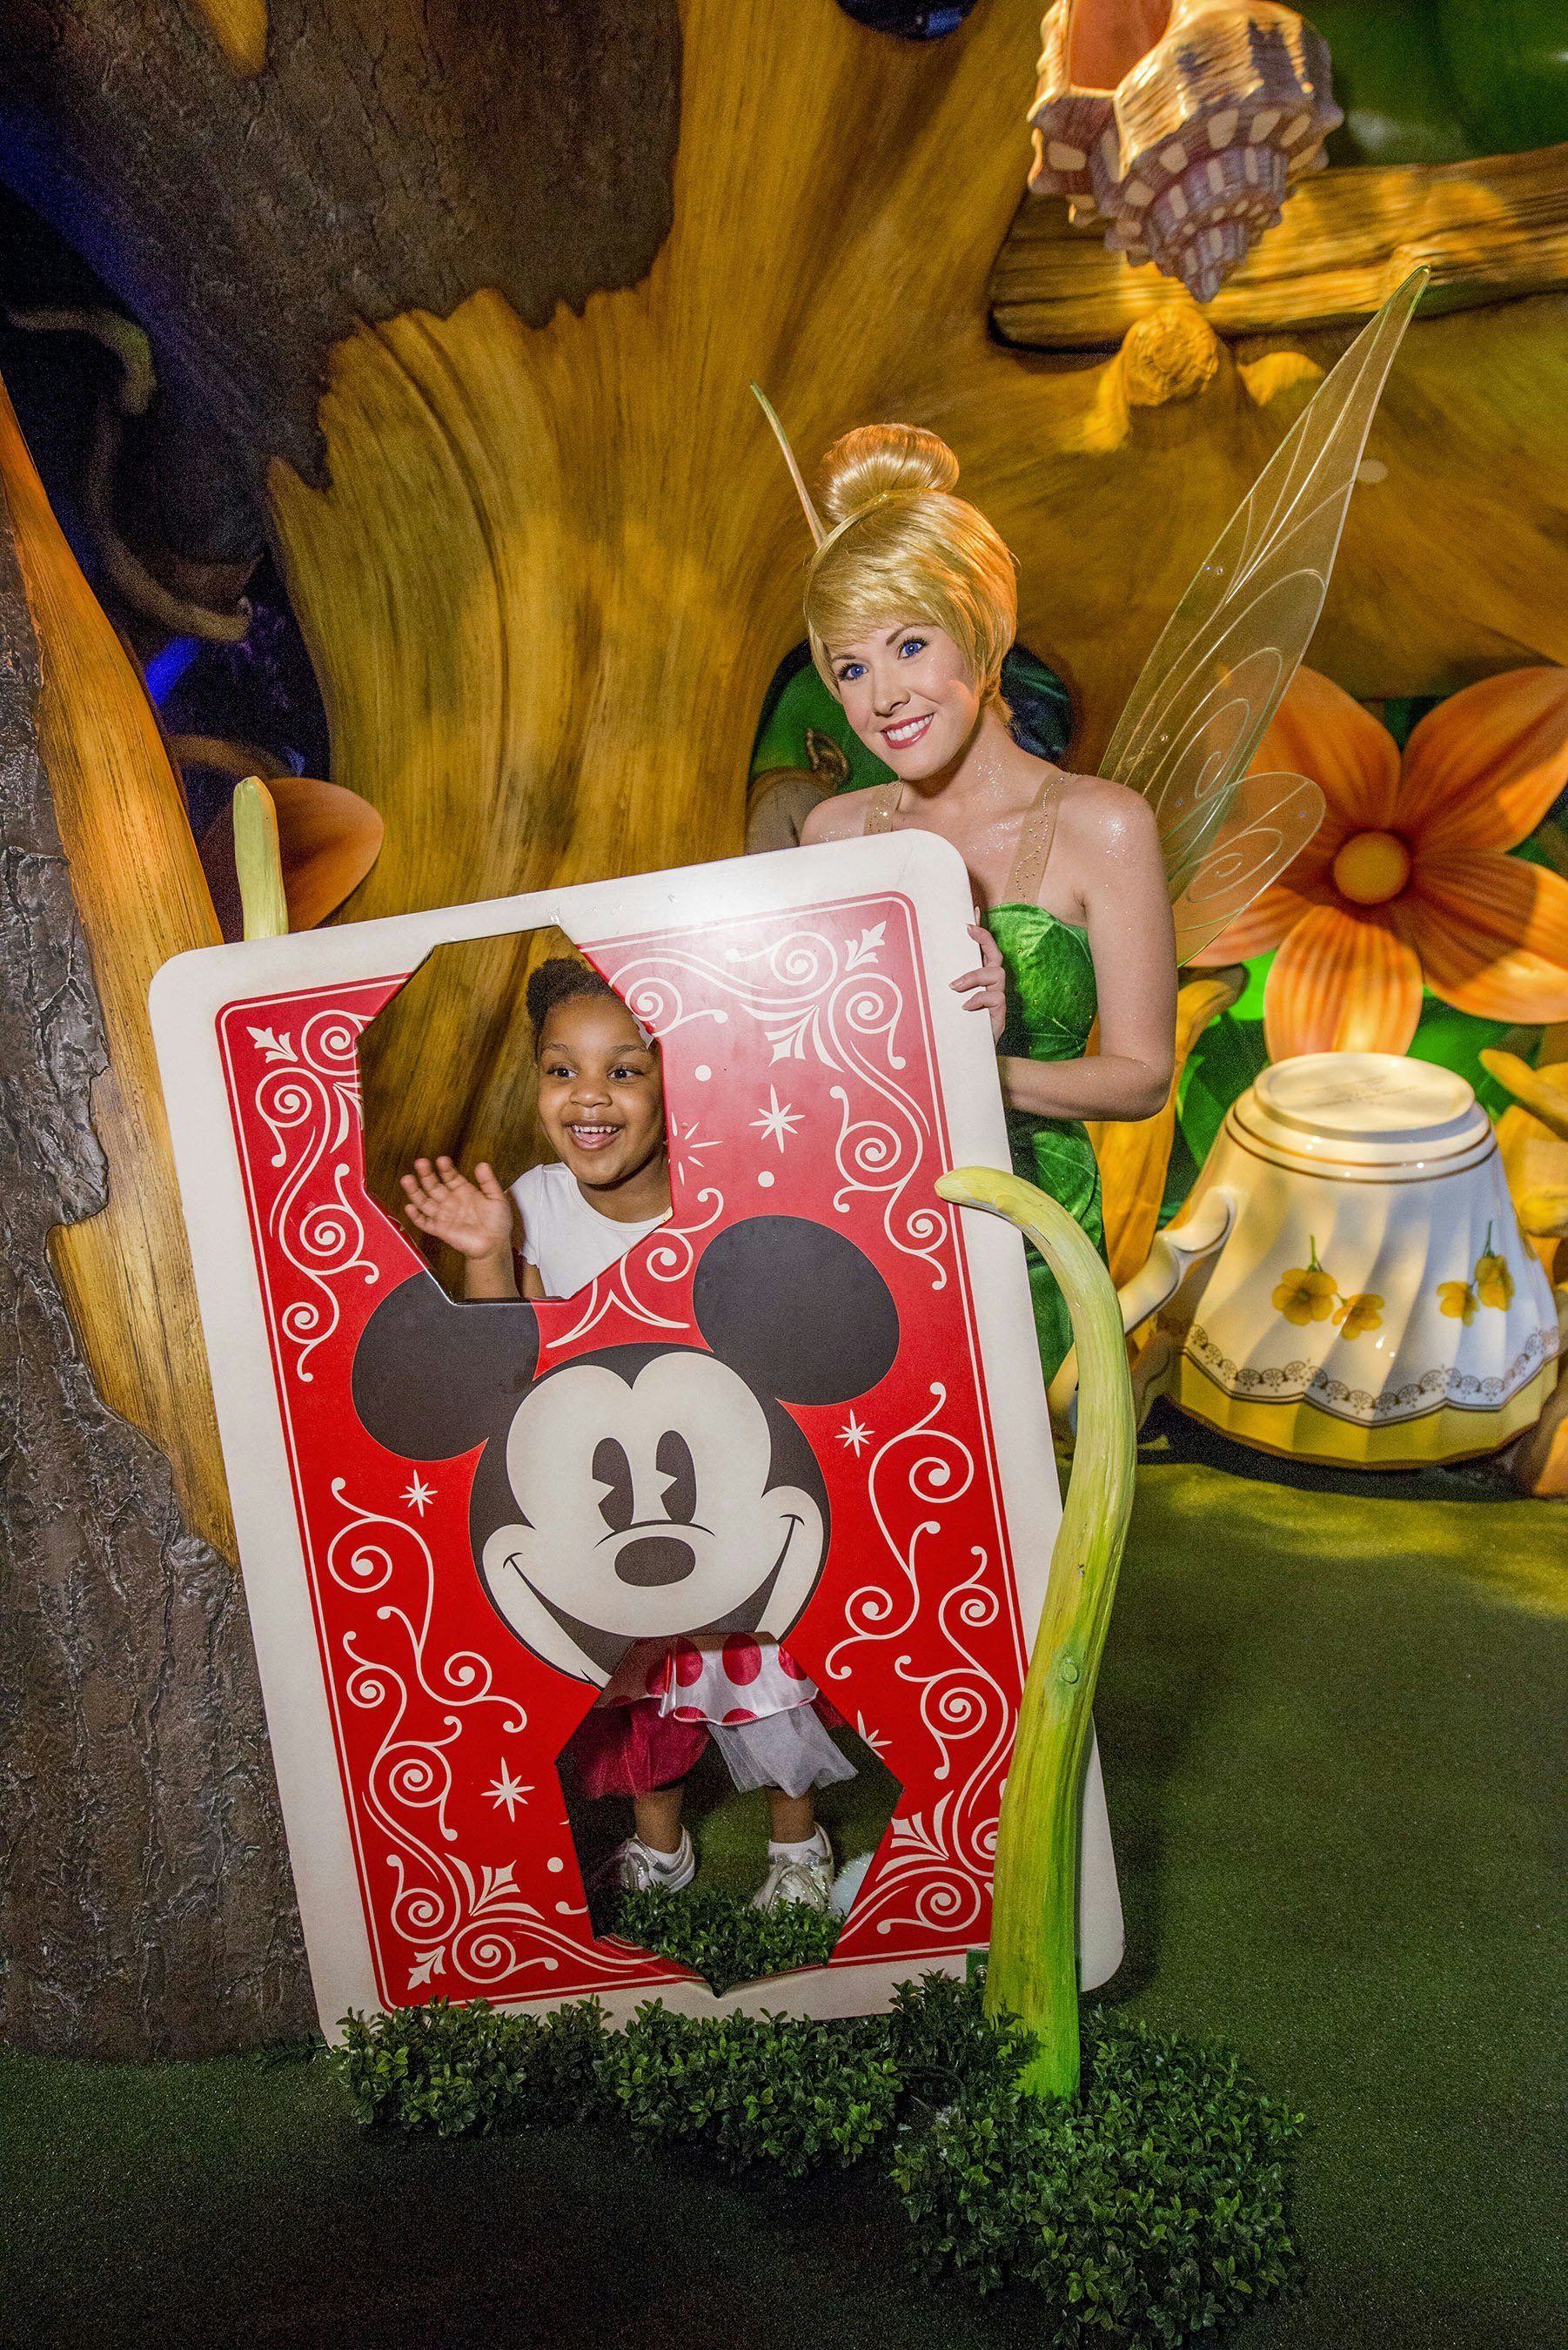 Tinker Bell strikes a pose with a young girl behind a large Mickey Mouse playing card